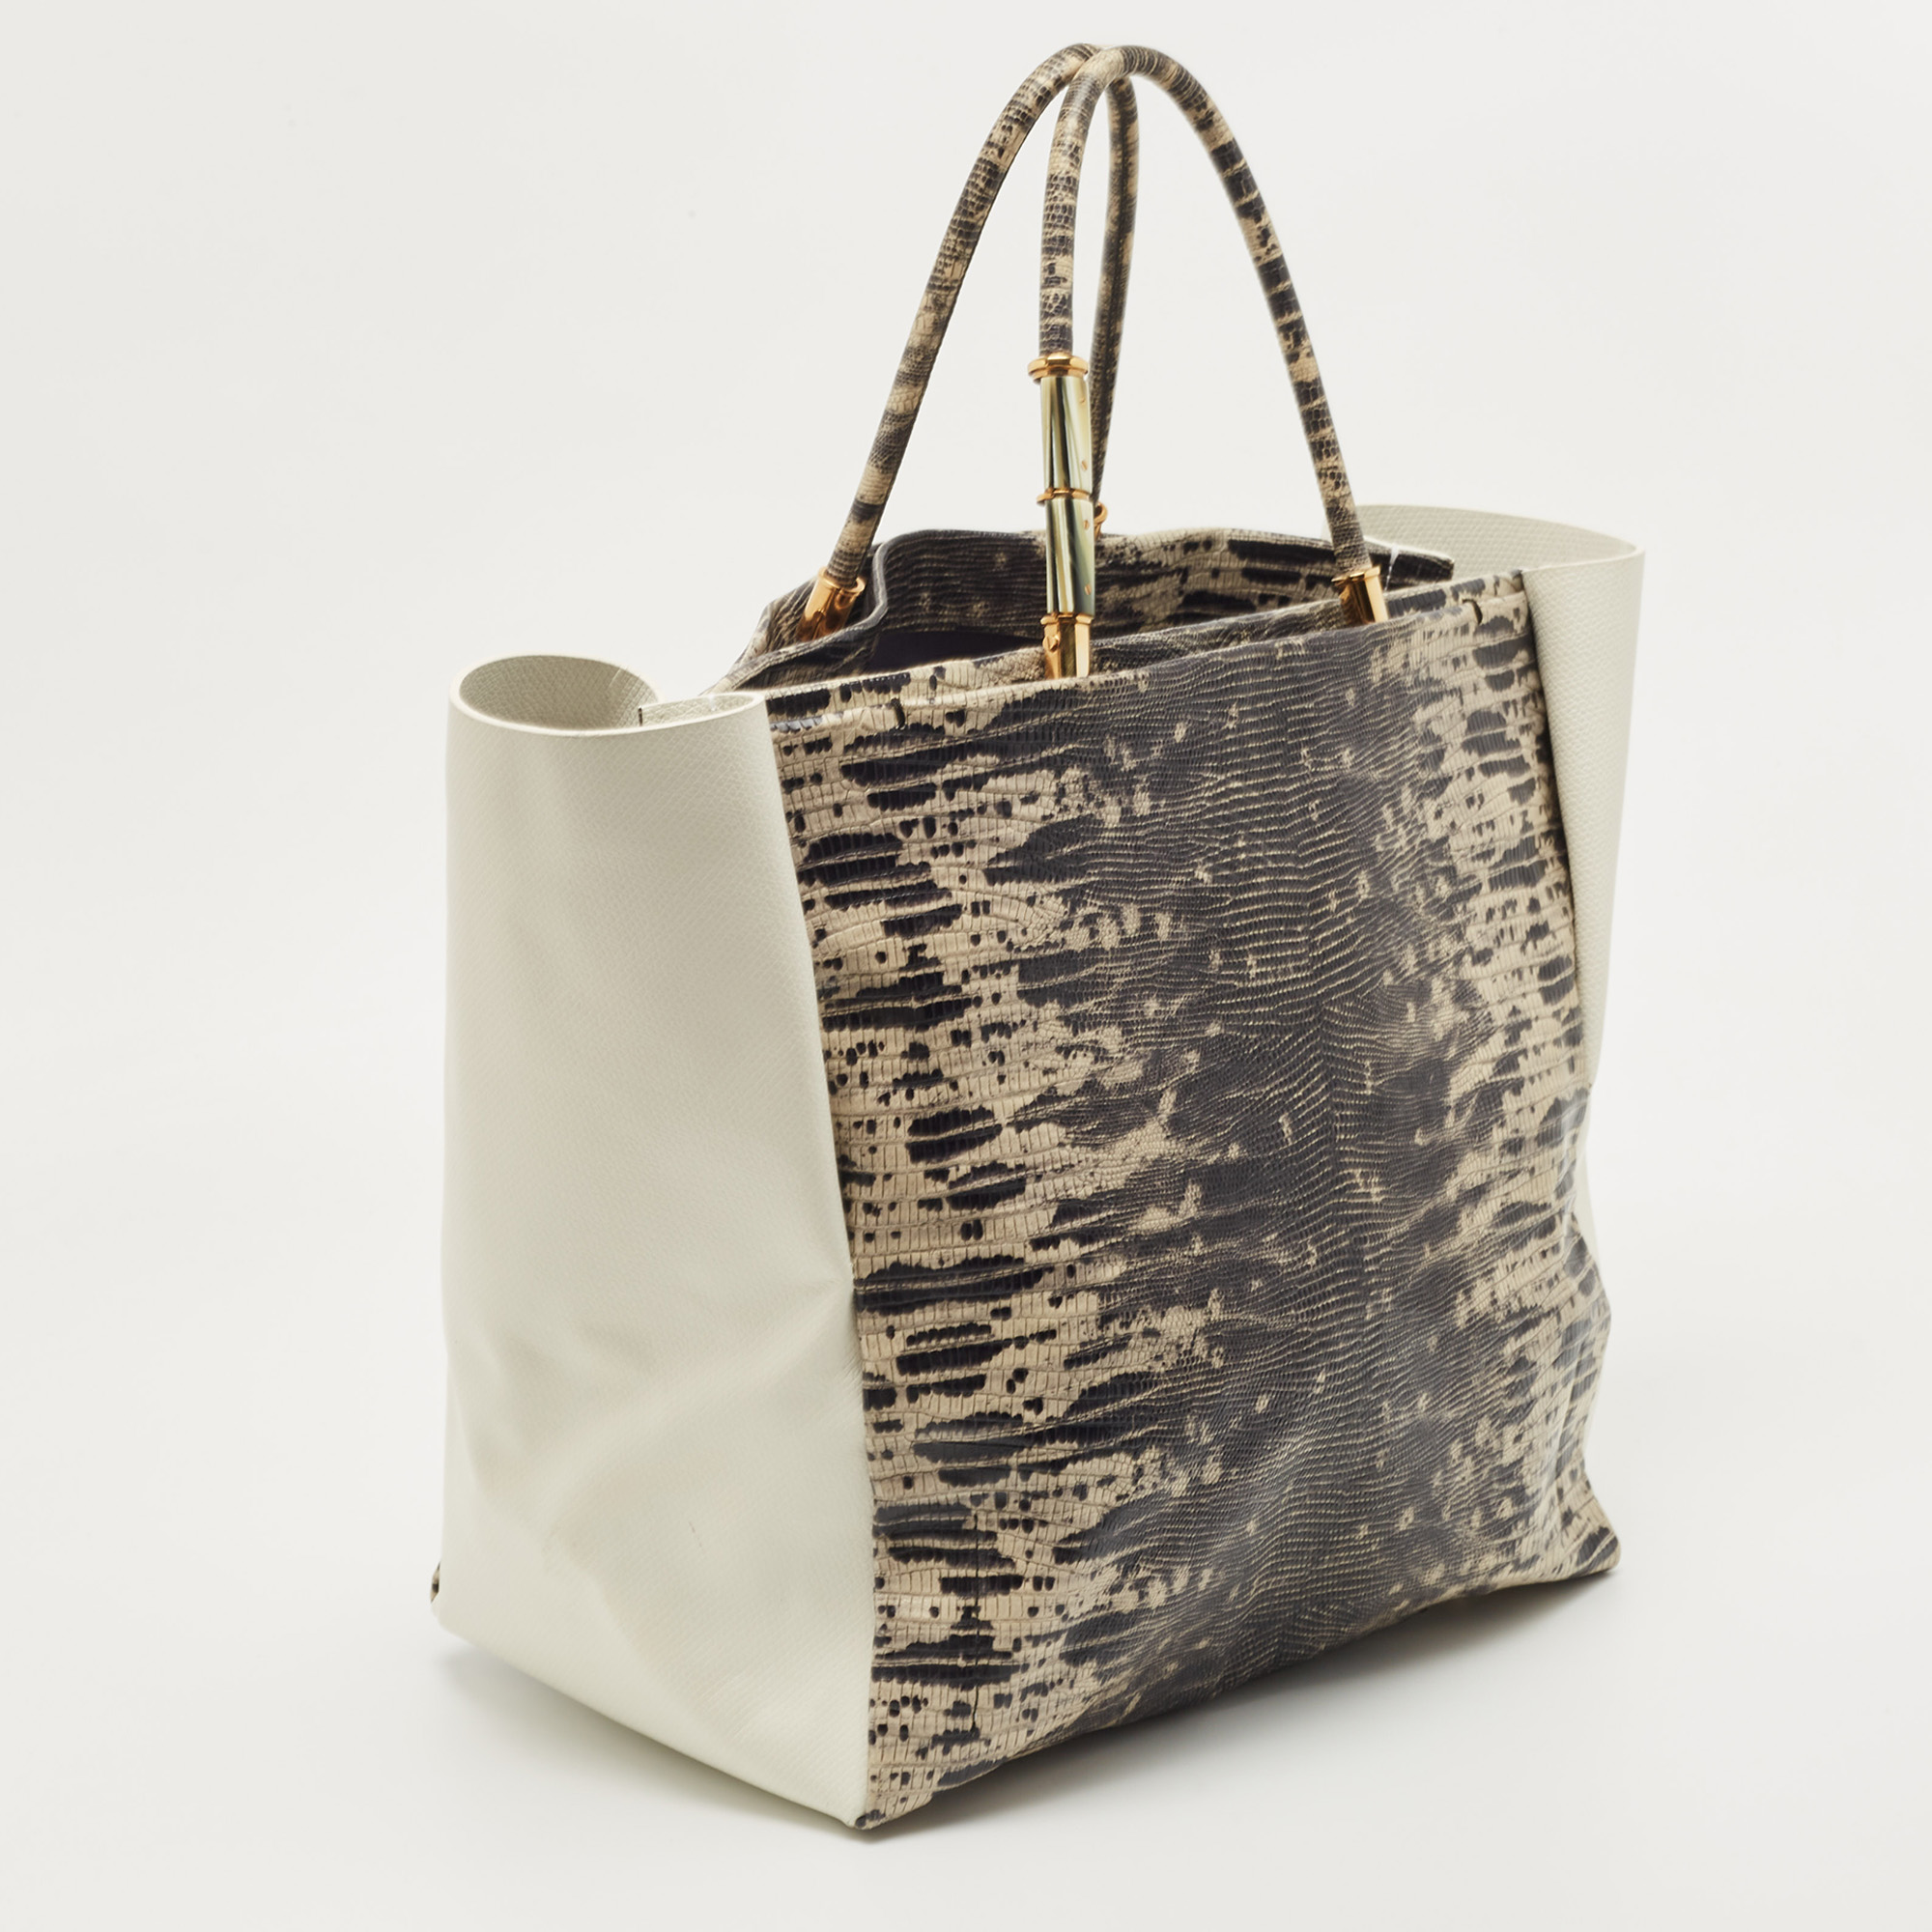 Lanvin Tri Color Leather And Lizard Embossed Leather Tote